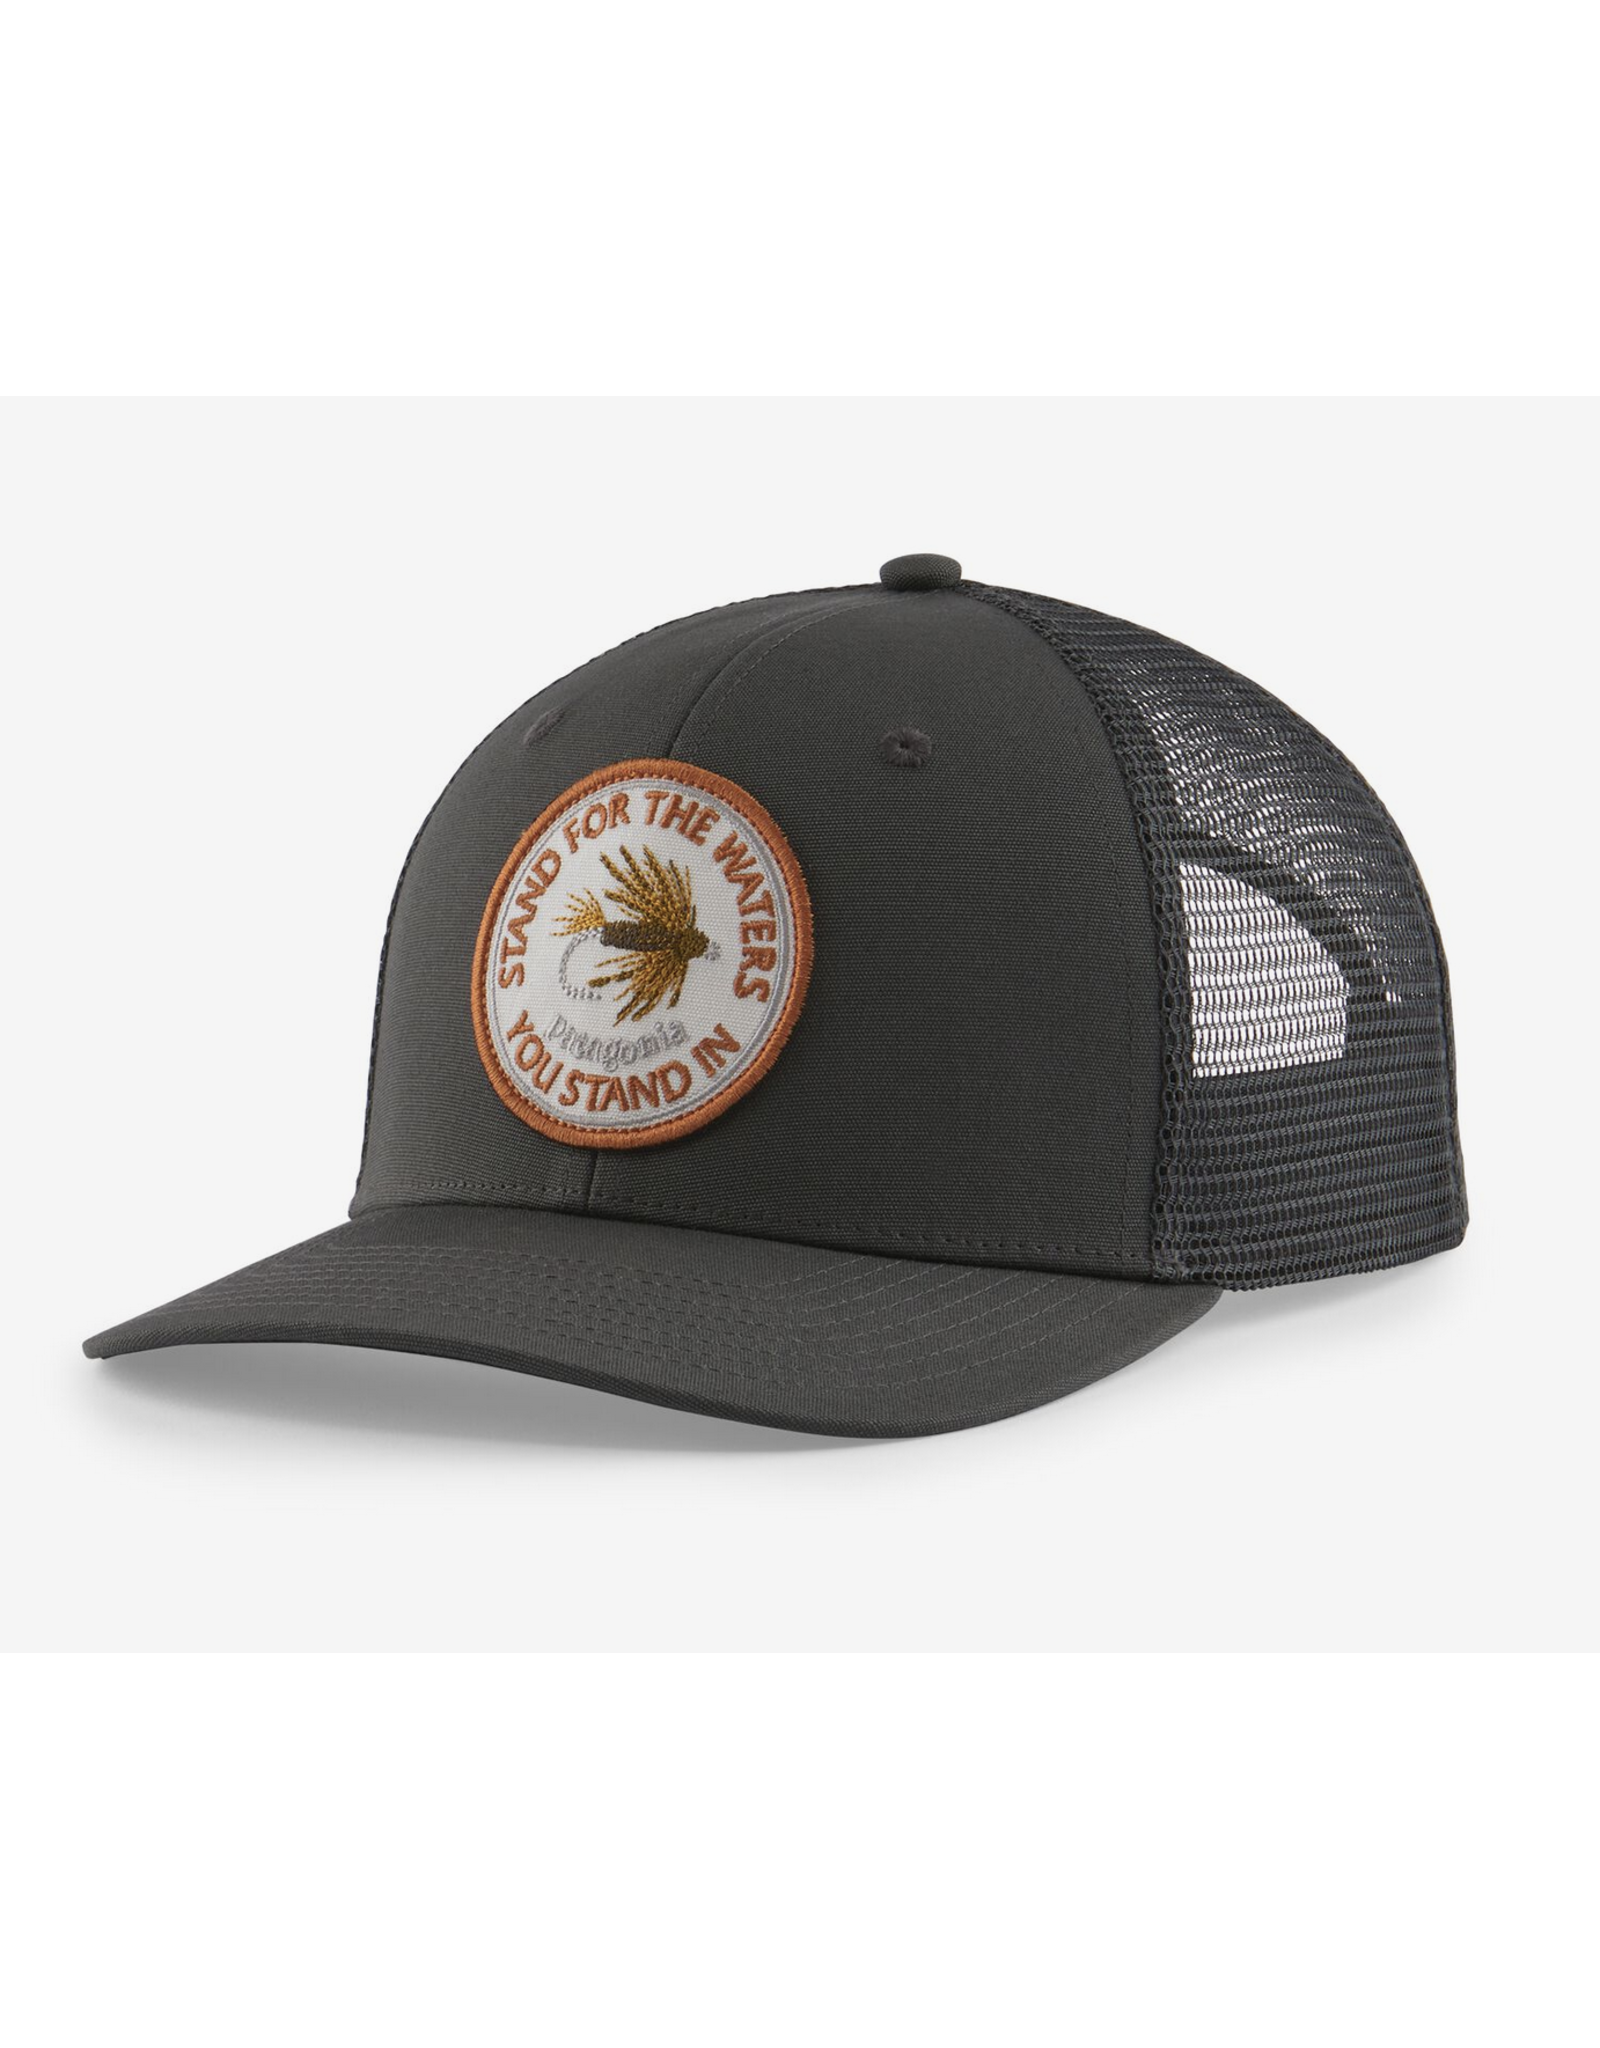 Patagonia Patagonia Take A Stand Trucker Hat (Forge Grey)